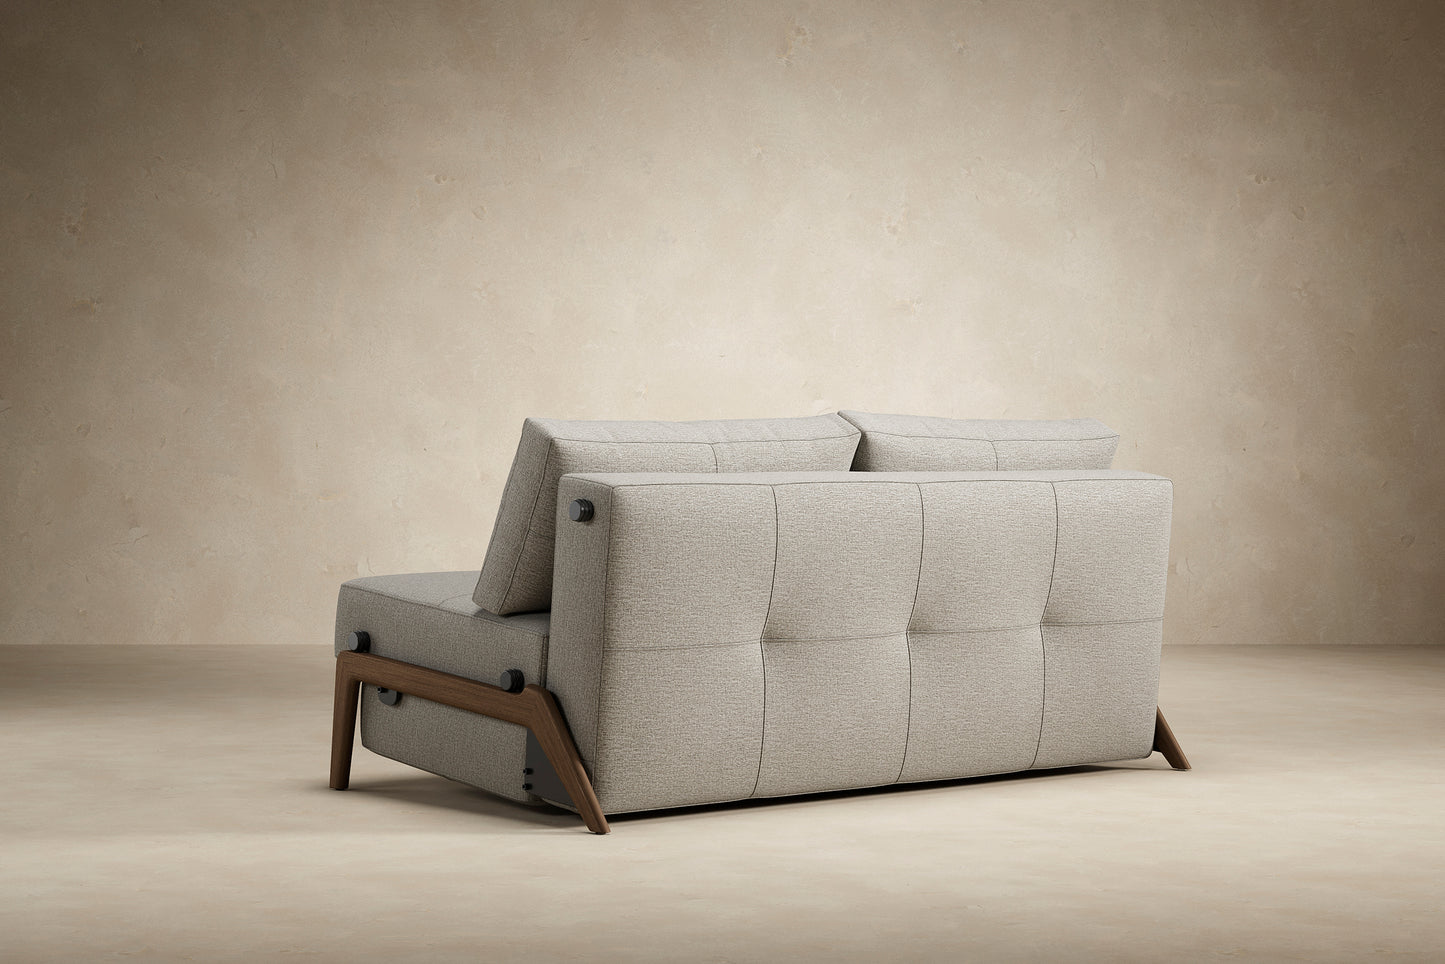 Innovation Living Cubed Queen Sofa Bed With Dark Wood Legs